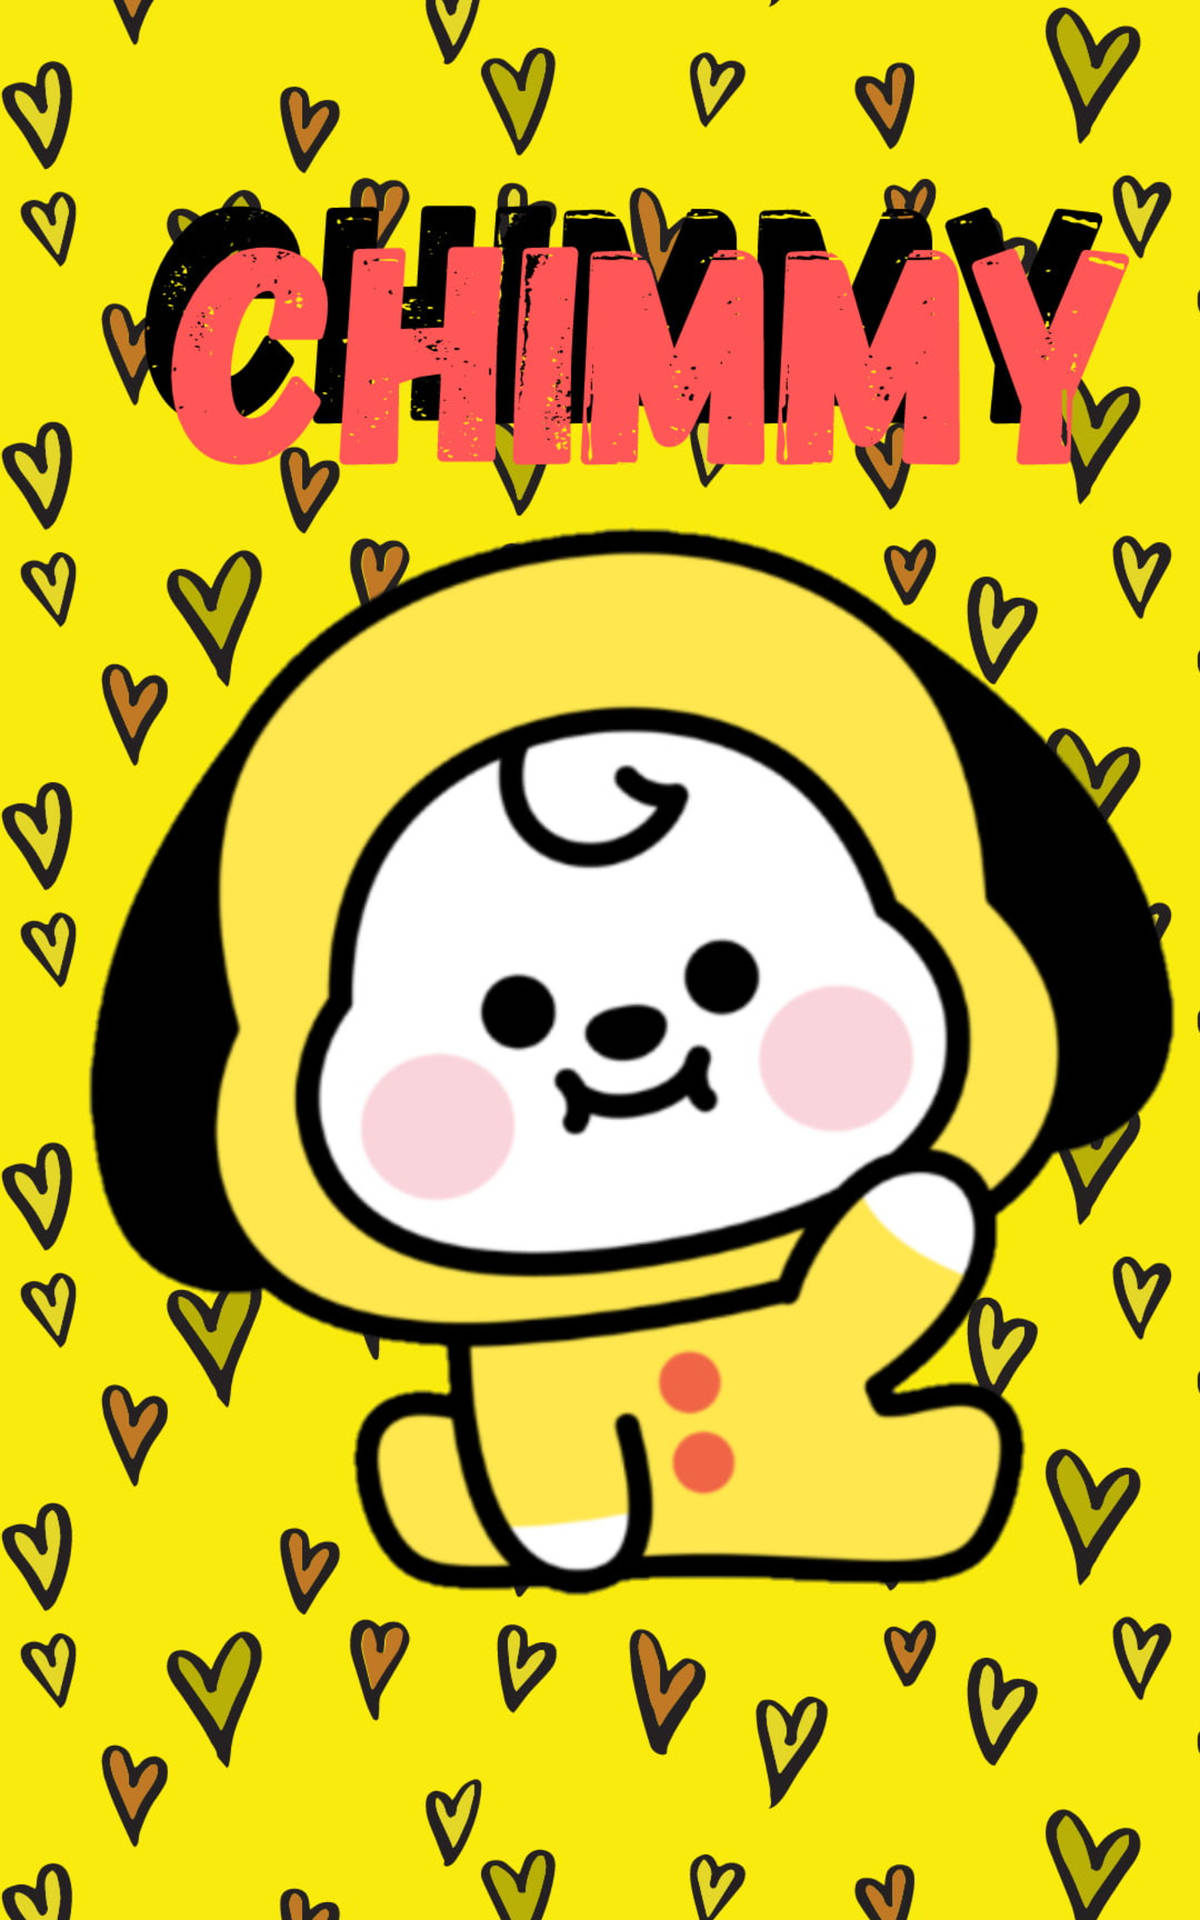 BTS BT21 Cooky Abstract Wallpapers  Cute BT21 Wallpaper for iPhone